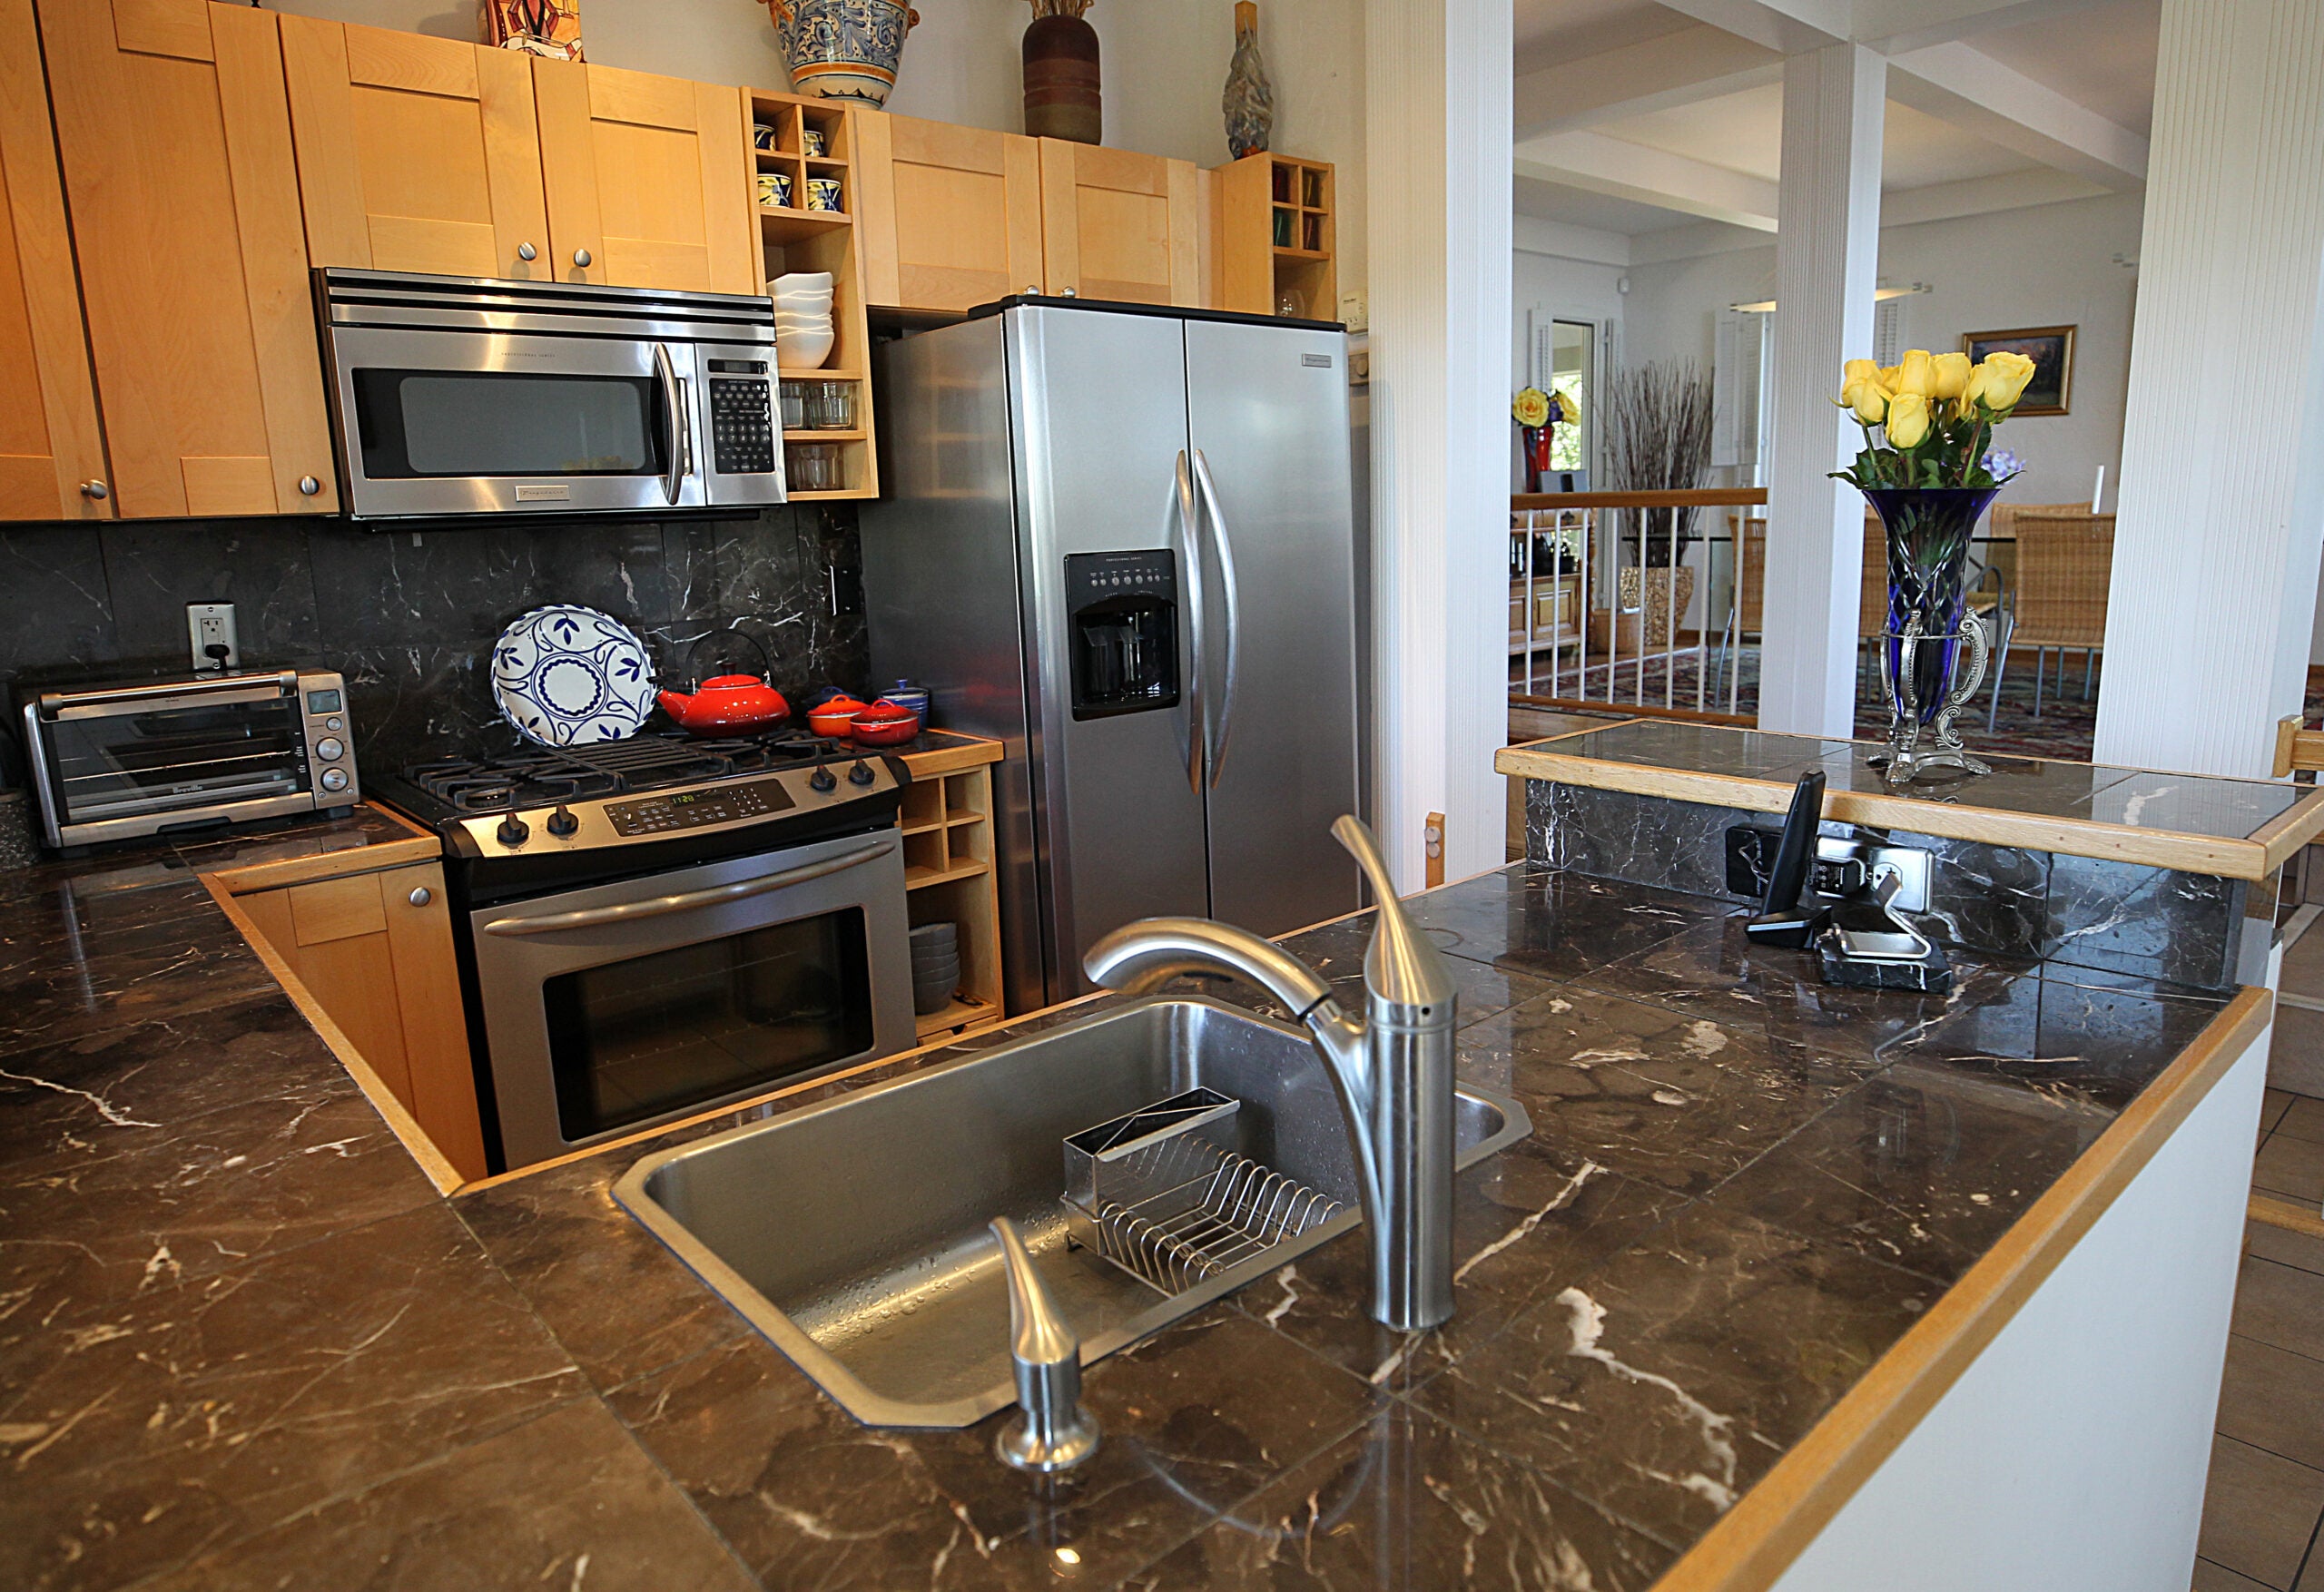 2 Roundys Hill Marblehead Kitchen 6309e0986fd3e Scaled 